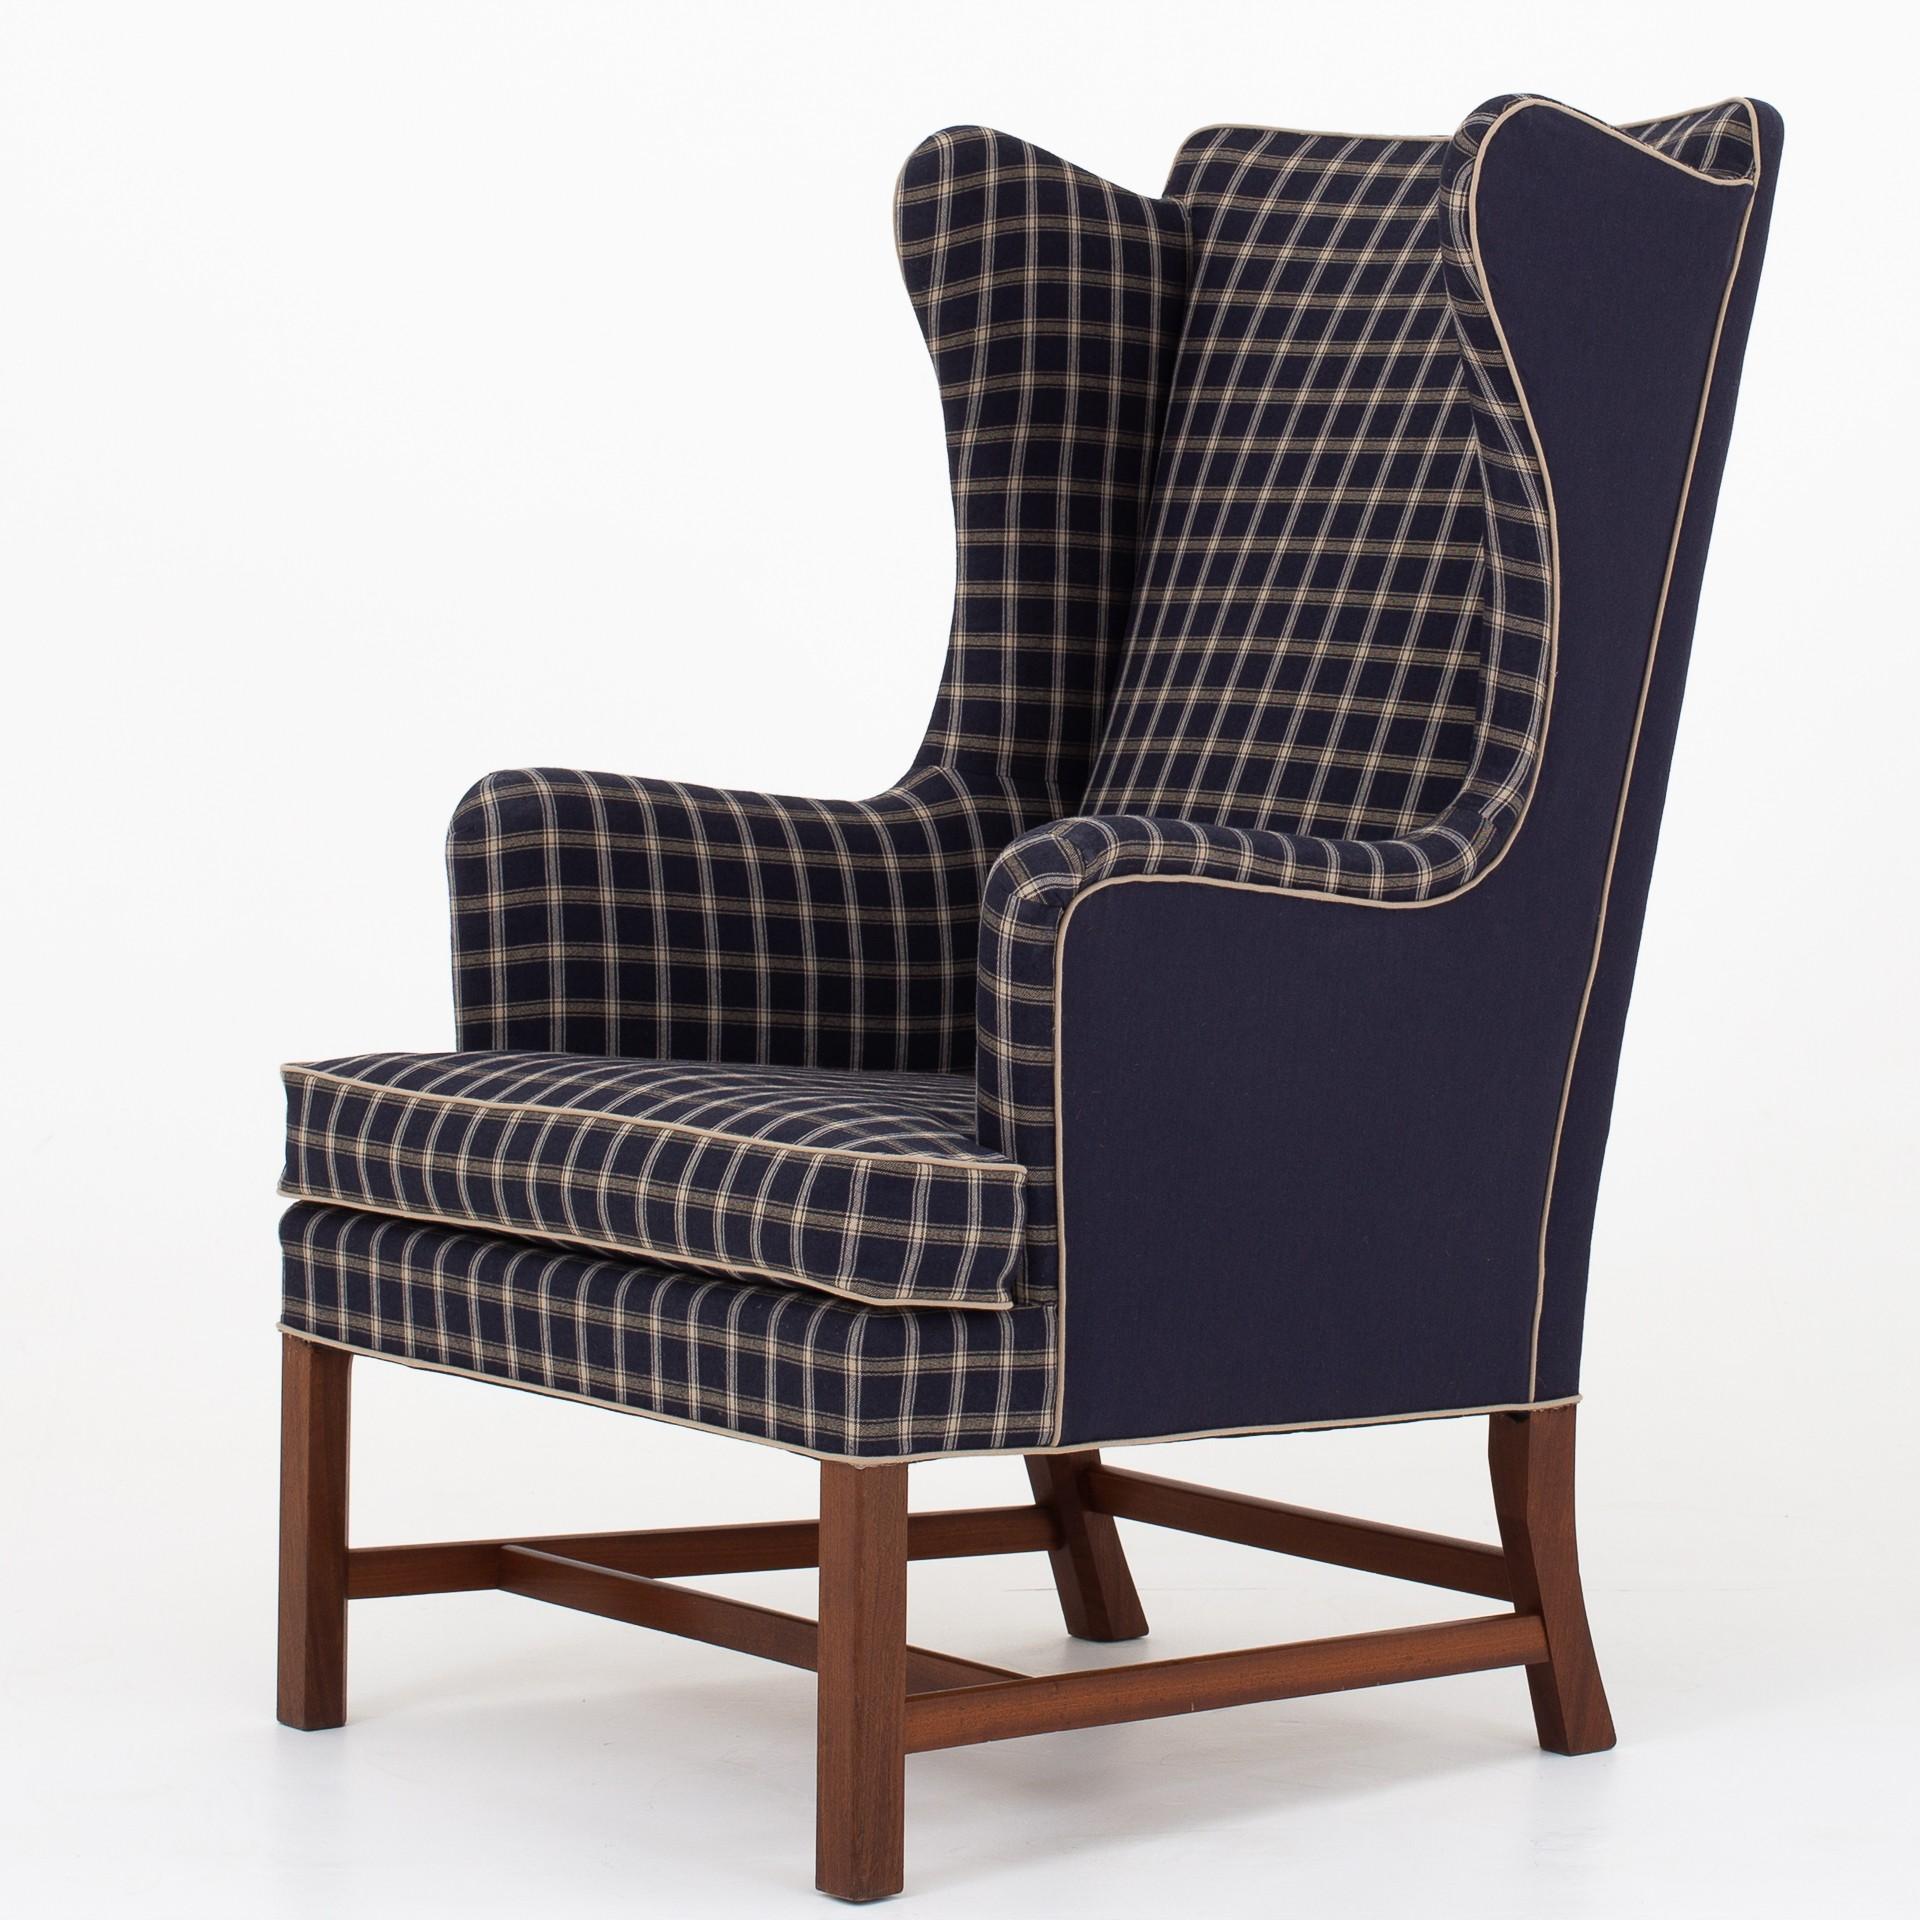 6212 - Wing back chair and stool in mahogany with new Cotil fabric. Designed in 1941. Maker Rud. Rasmussen.